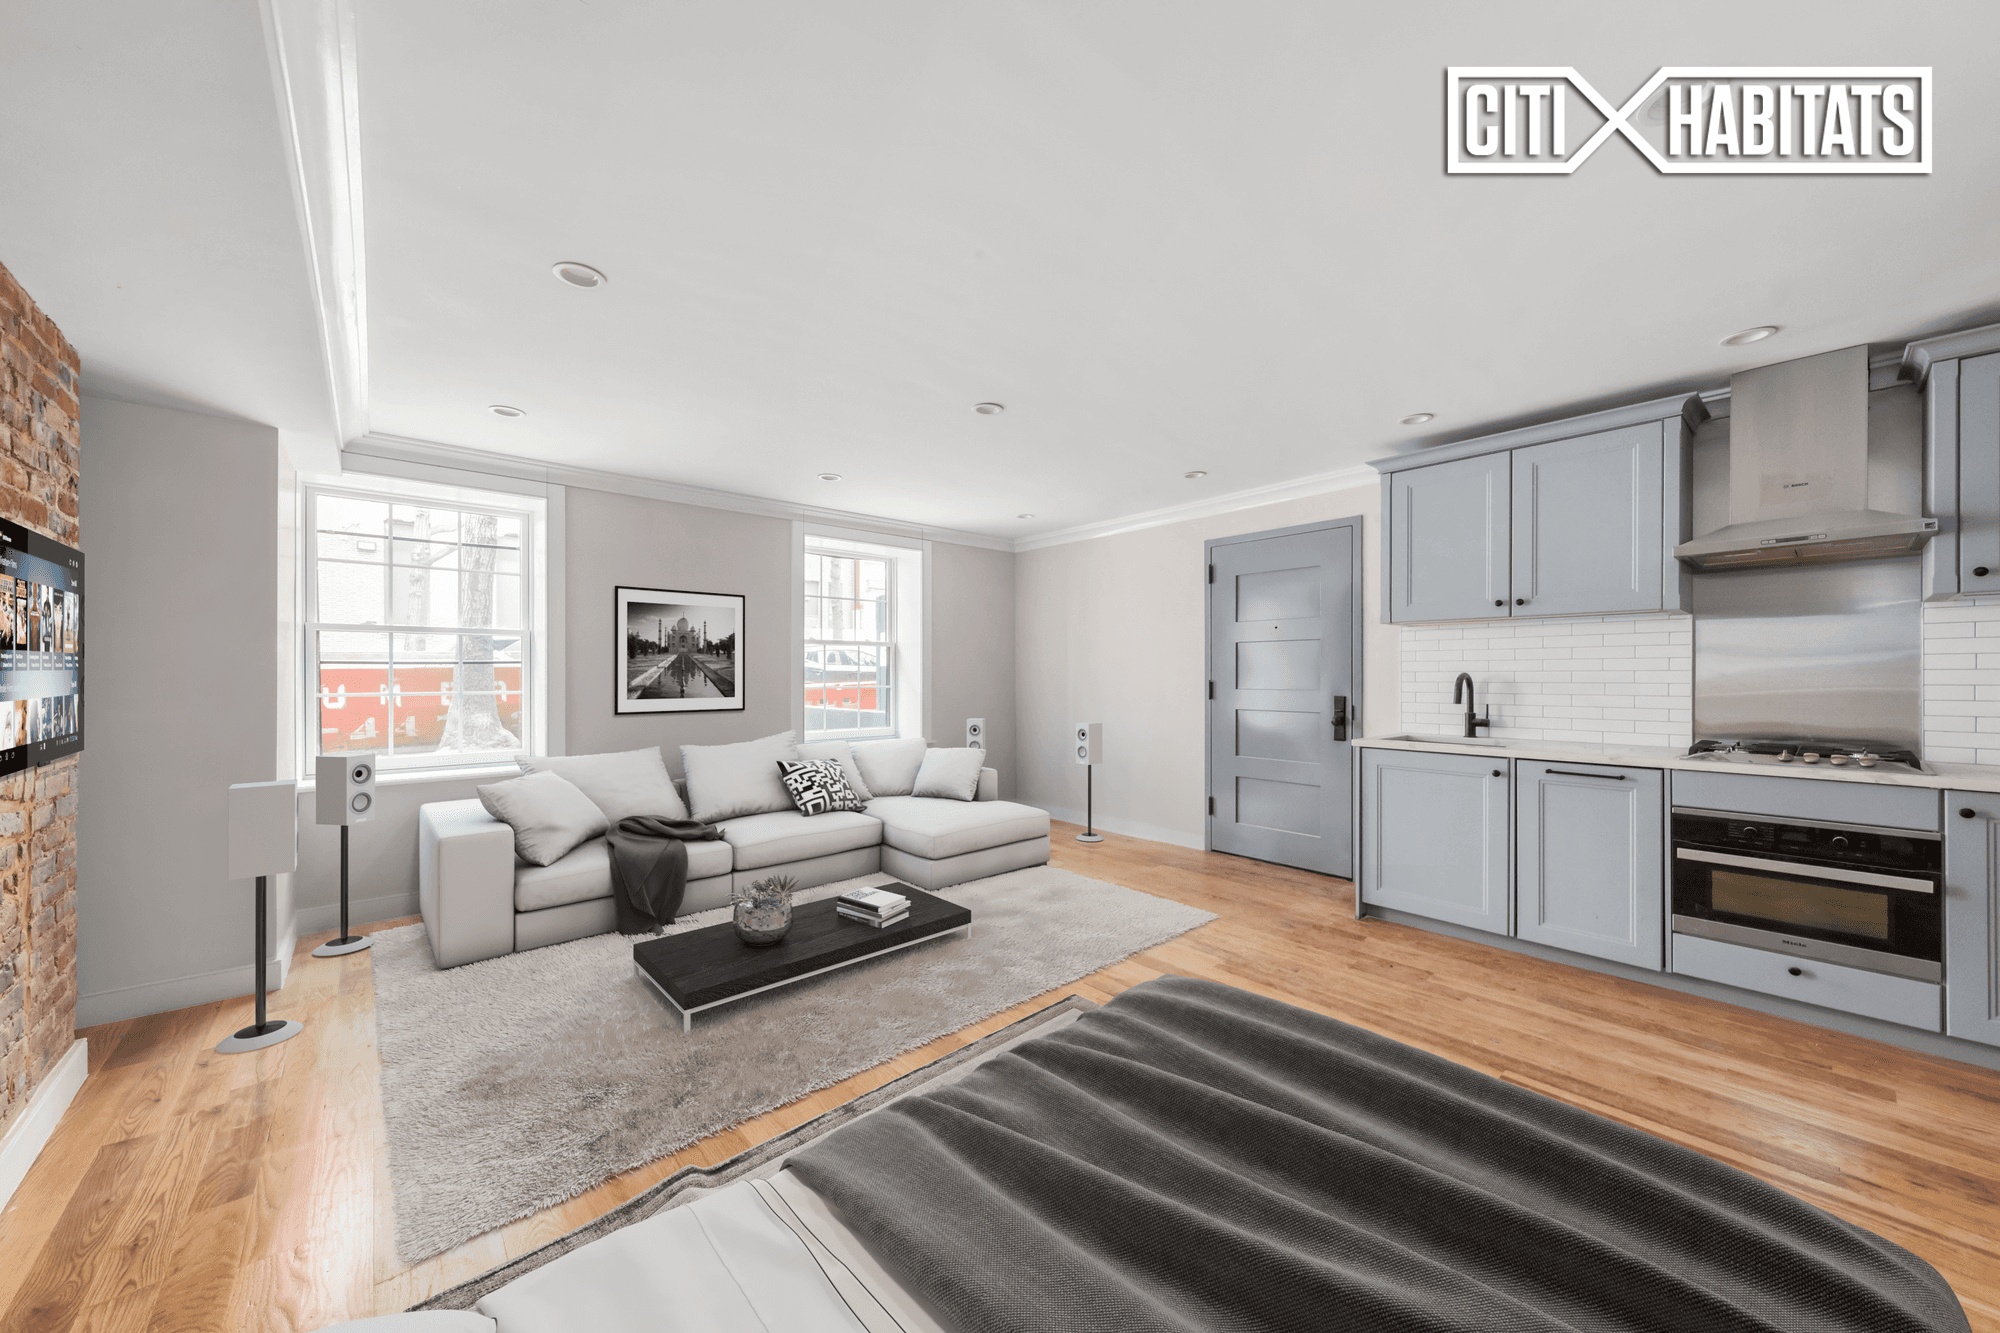 Experience the BoCoCa lifestyle of your dreams in this pristine and spacious studio in a completely gut renovated Cobble Hill townhouse.